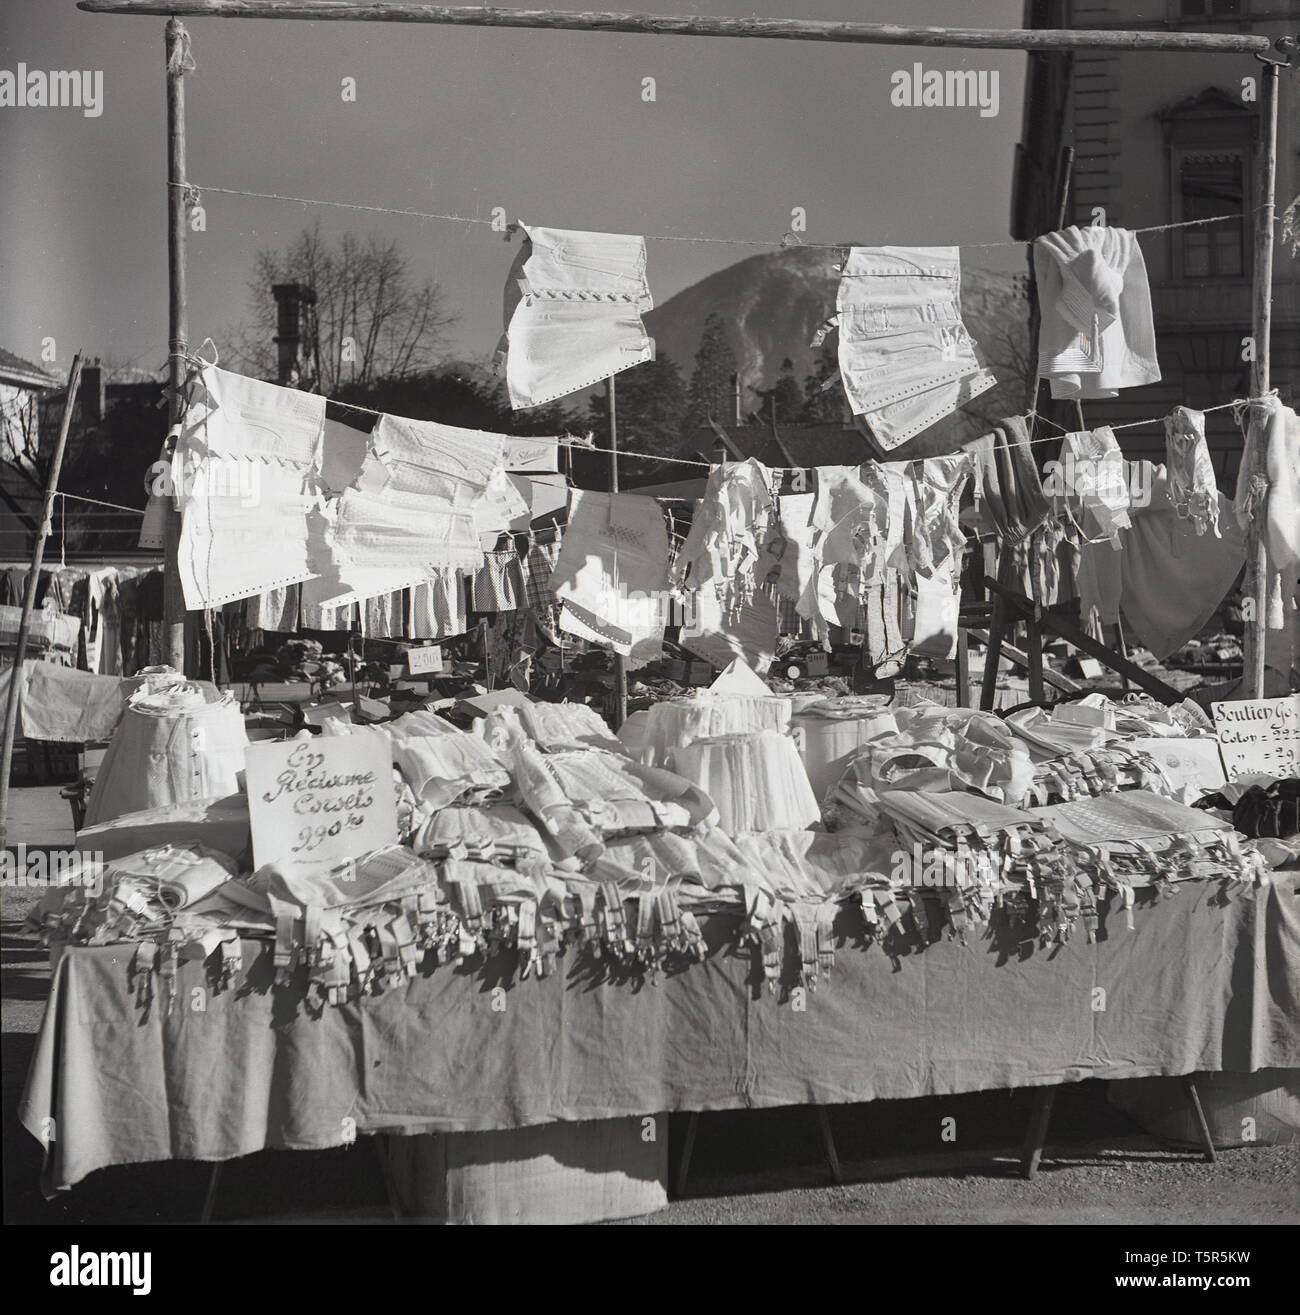 https://c8.alamy.com/comp/T5R5KW/1950s-historical-outdoor-market-stall-selling-ladies-cloth-and-linen-undergarments-including-girdles-and-corsets-paris-T5R5KW.jpg